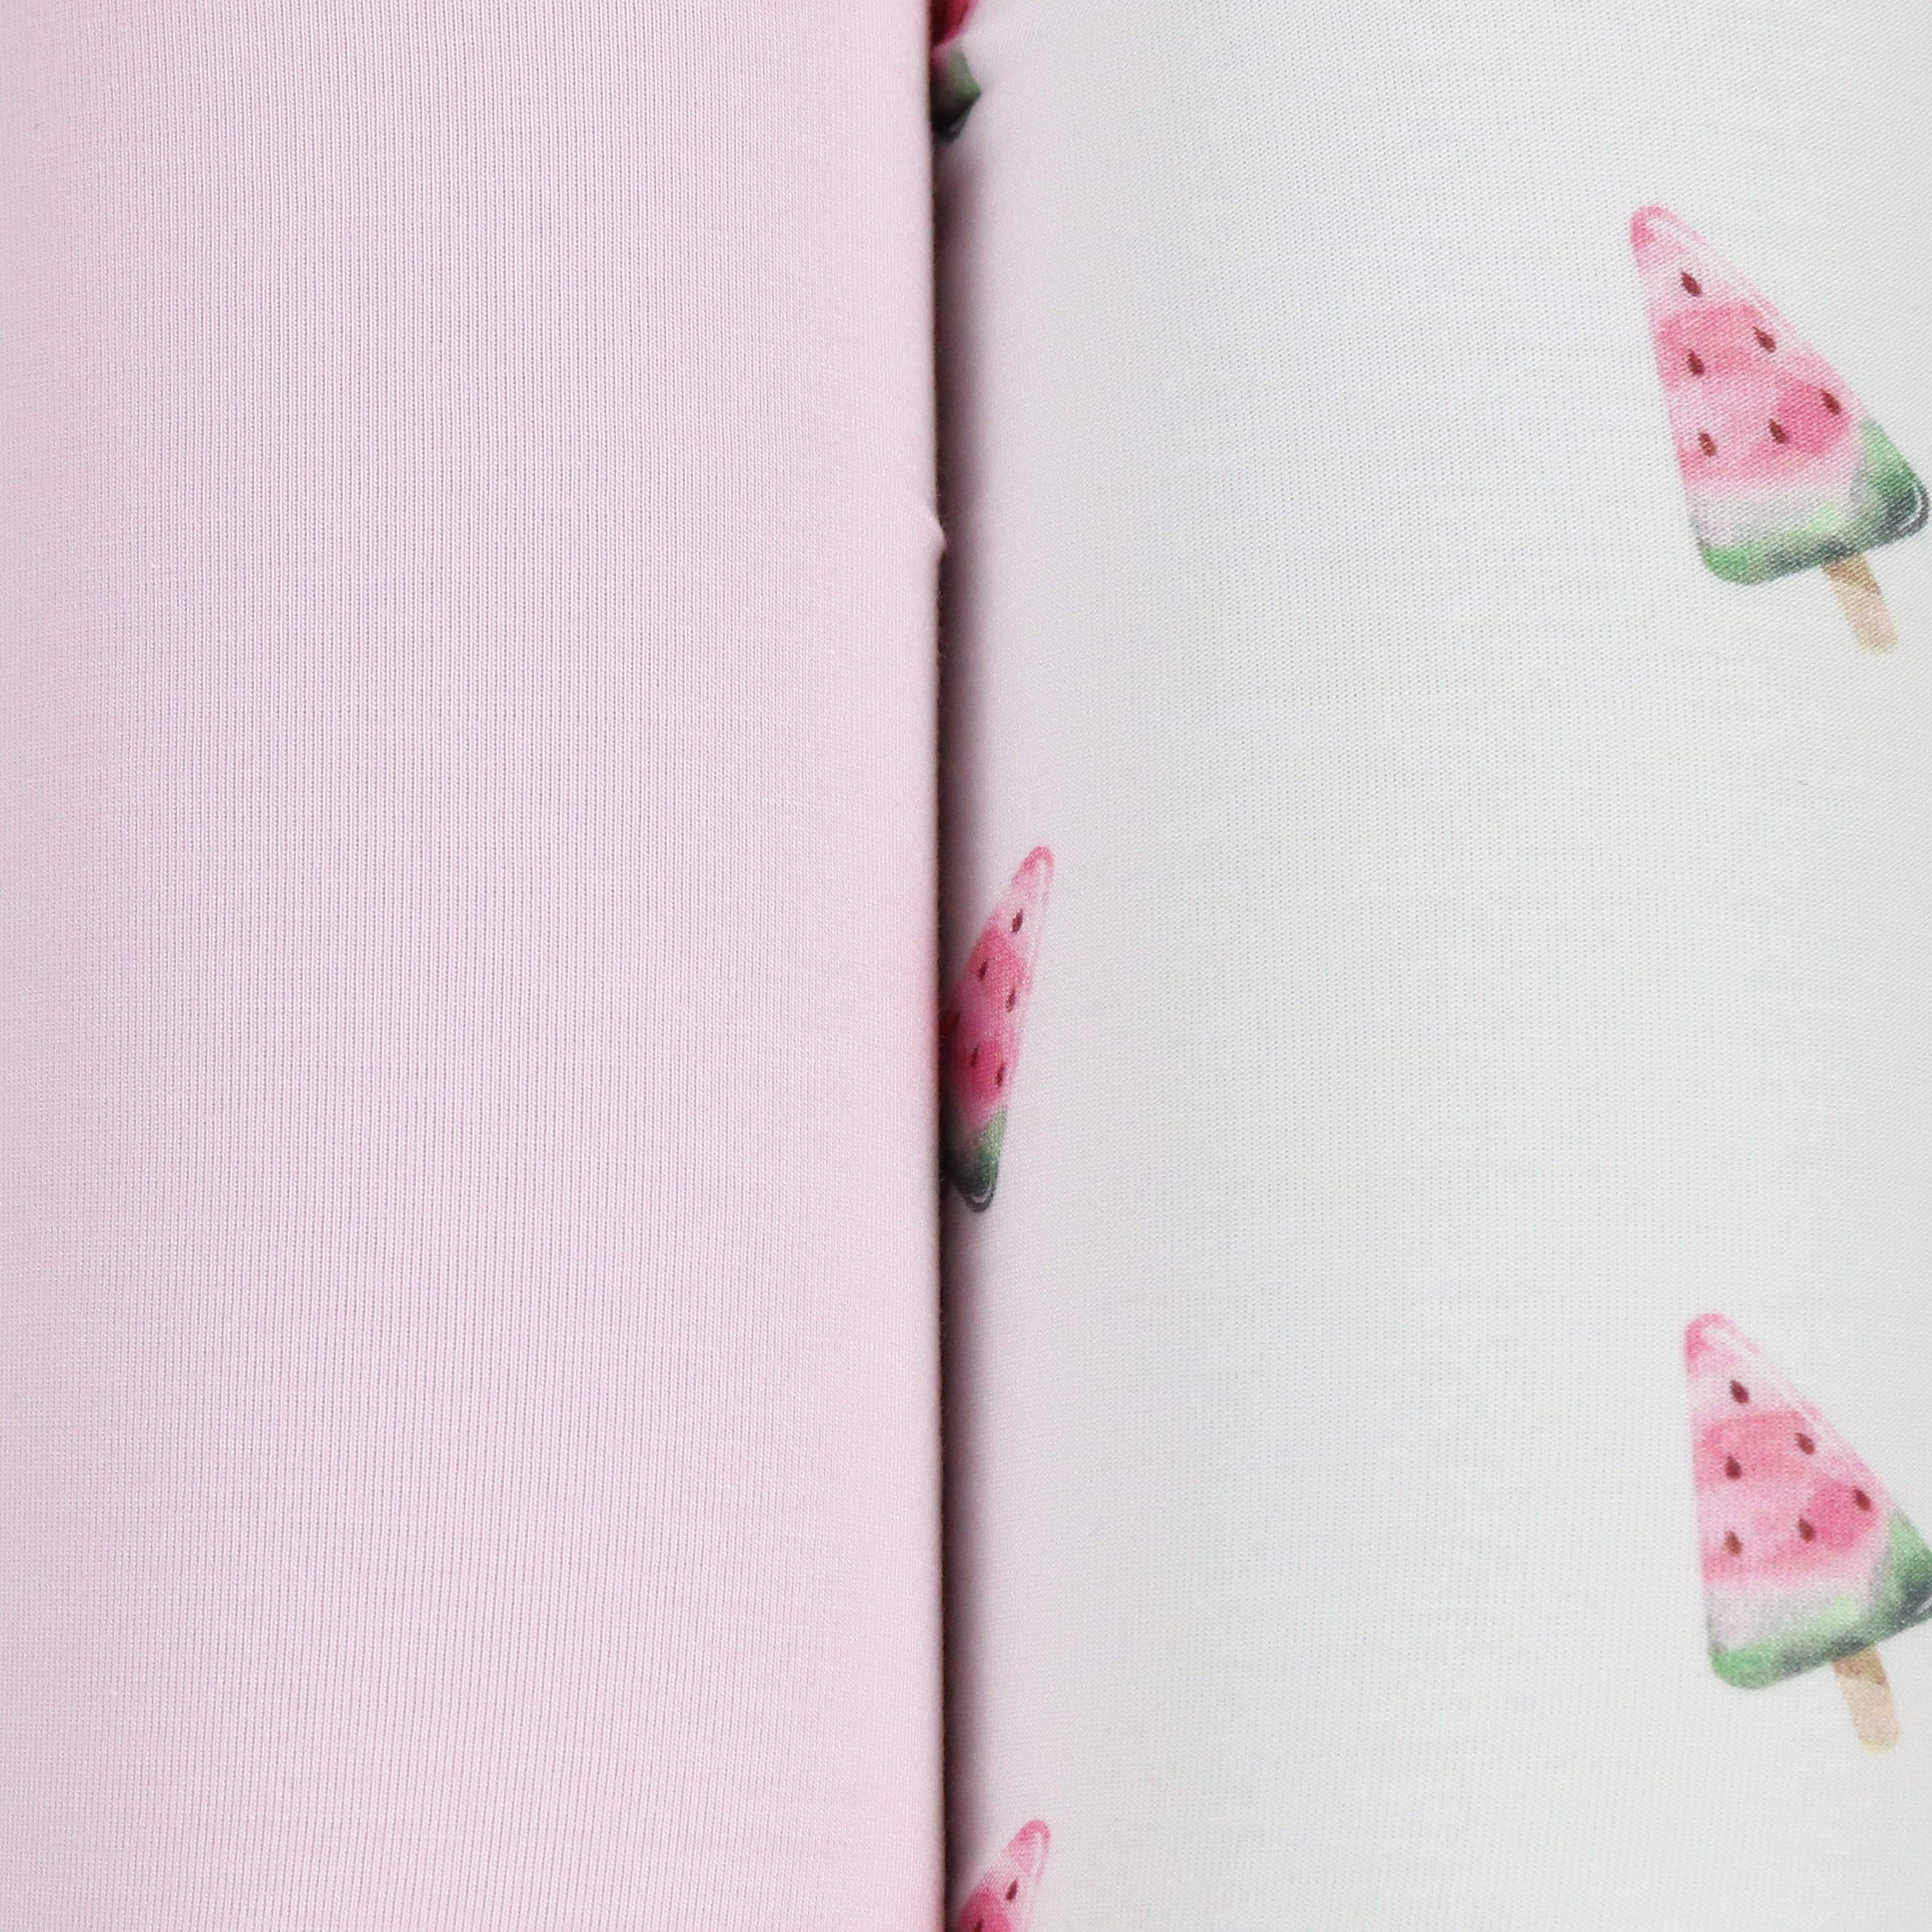 Watermelon Popsicle and Pink 2 PK Swaddle Blanket